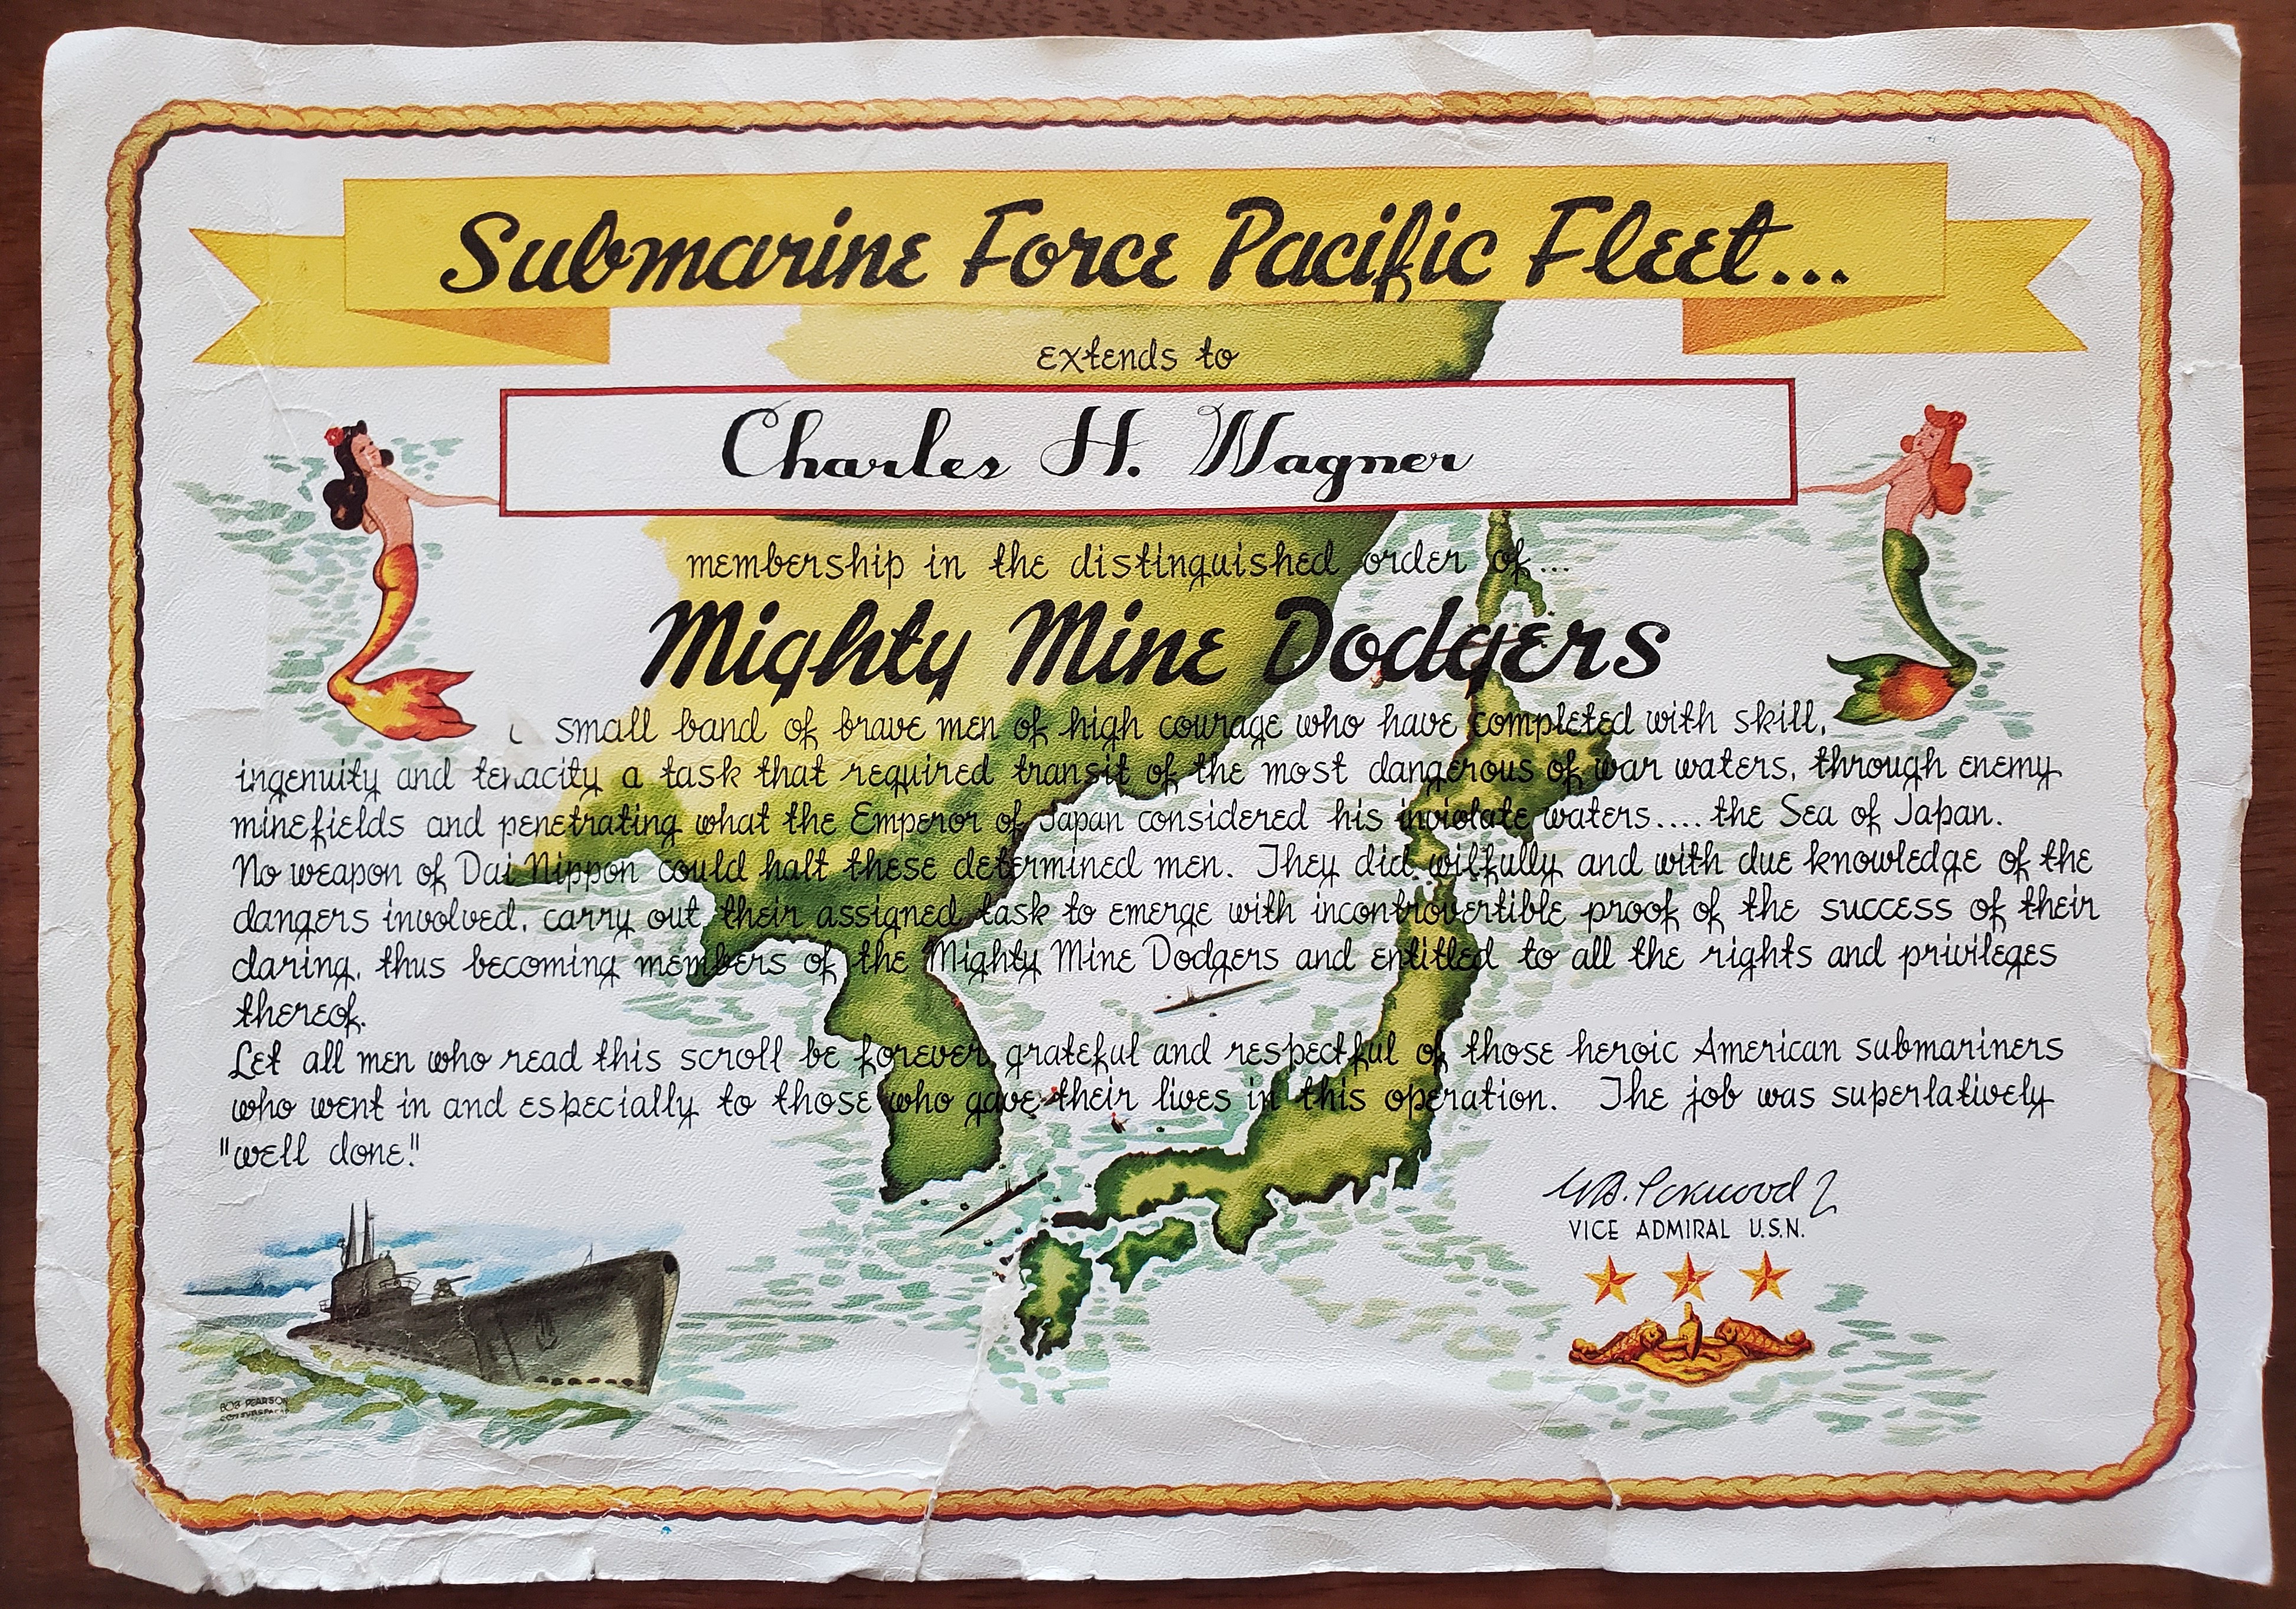 Certificate for the Distinguished Order of the Mighty Mine Dodgers issued to all officers and men of the eight returning submarines from the dangerous passage into and out of the Sea of Japan, May and Jun 1945.